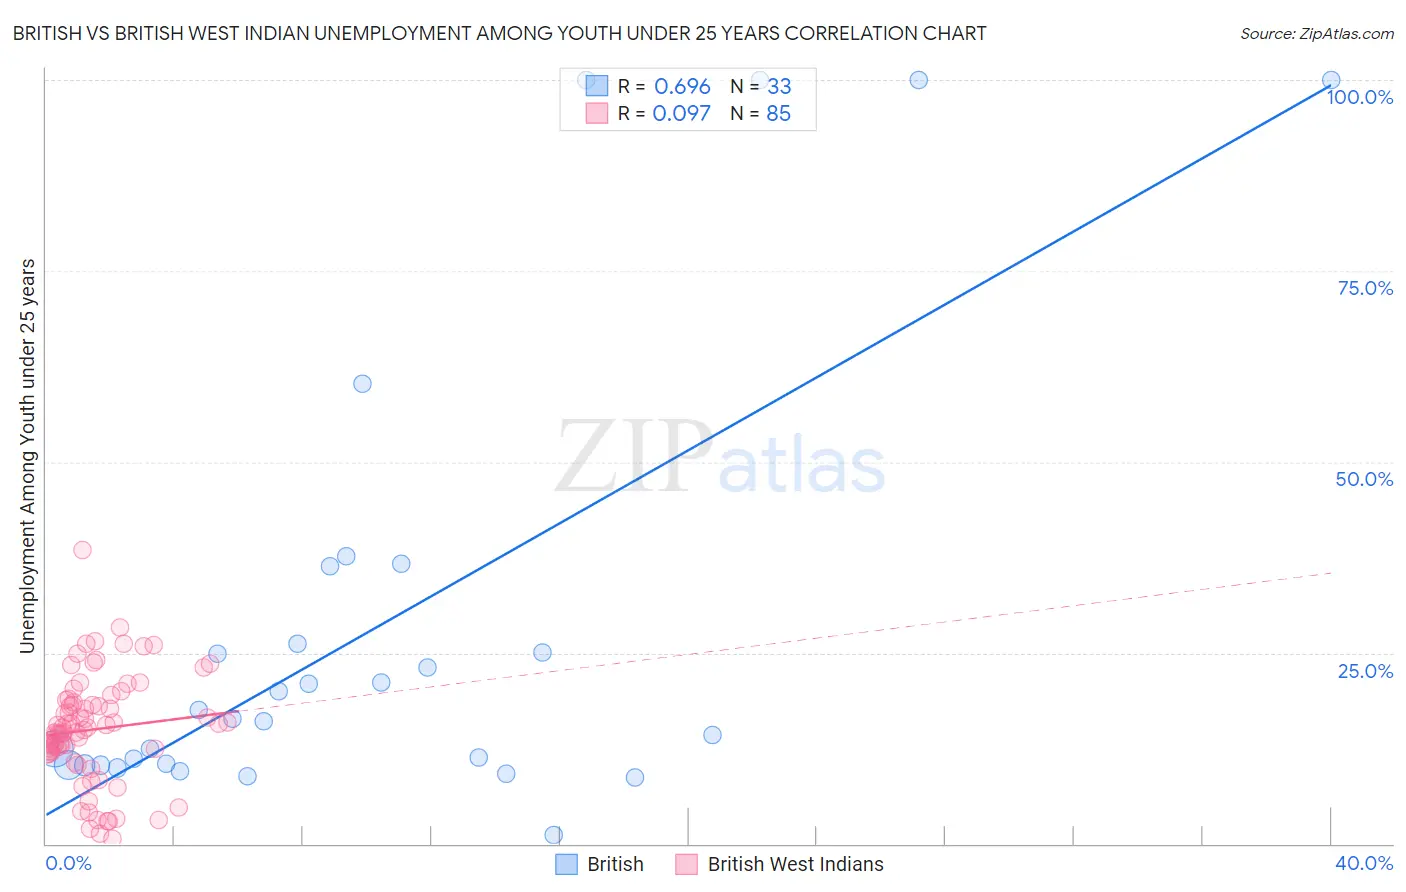 British vs British West Indian Unemployment Among Youth under 25 years